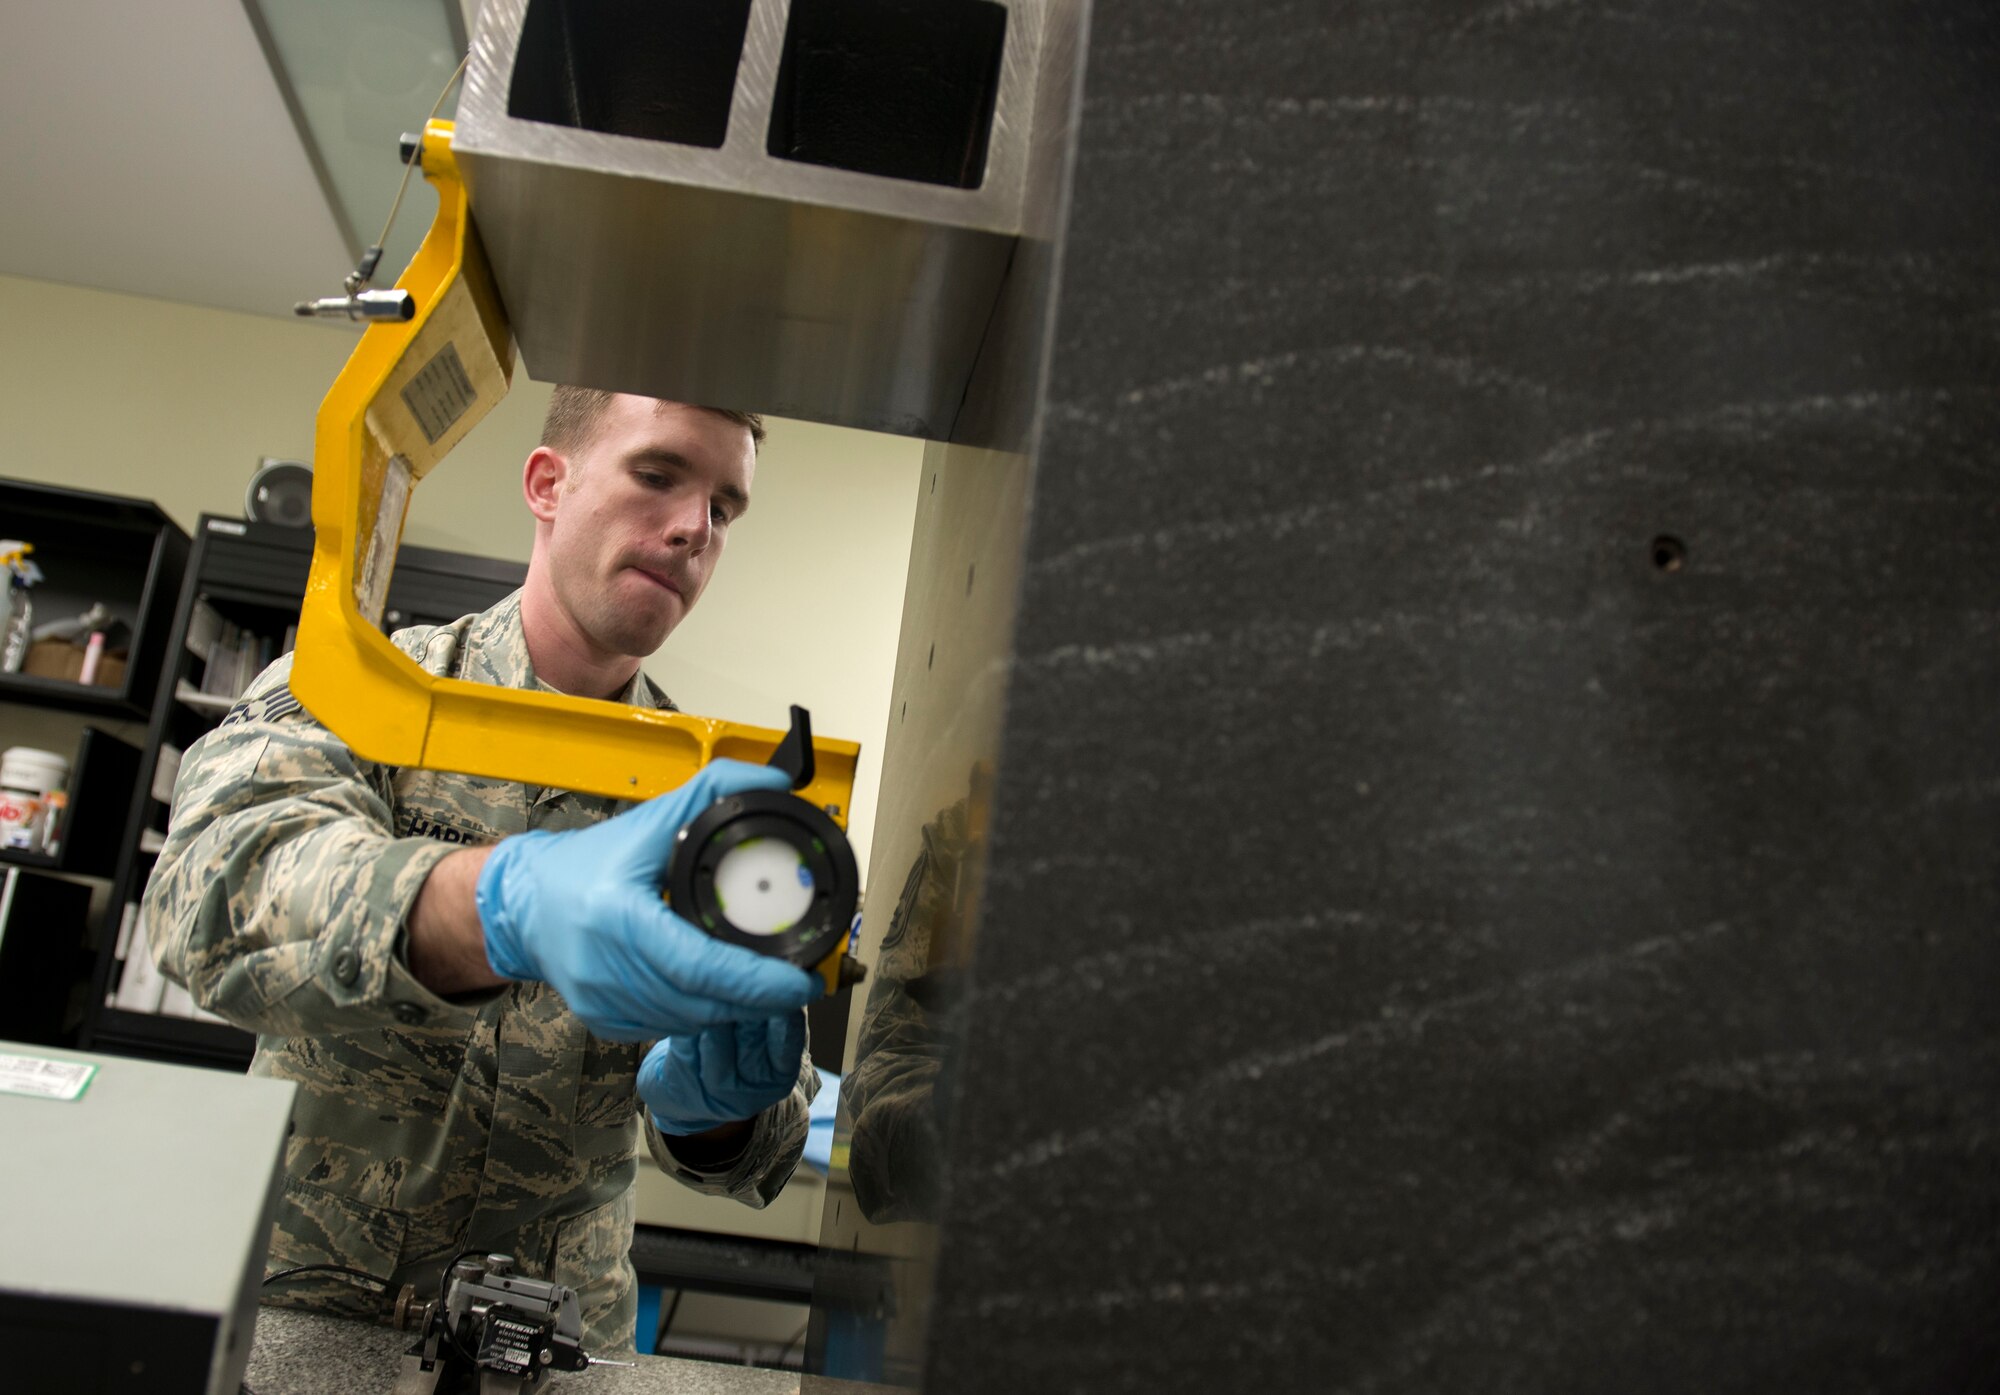 U.S. Air Force Staff Sgt. Benjamin Harvey, 18th Component Maintenance Squadron test, measurement and diagnostic equipment element supervisor, inspects the insides of equipment used to align the guns of the F-15 Eagle at May 10, 2016, at Kadena, Japan. The time it takes to inspect and calibrate equipment can range from minutes to weeks. (U.S. Air Force photo by Senior Airman Omari Bernard)